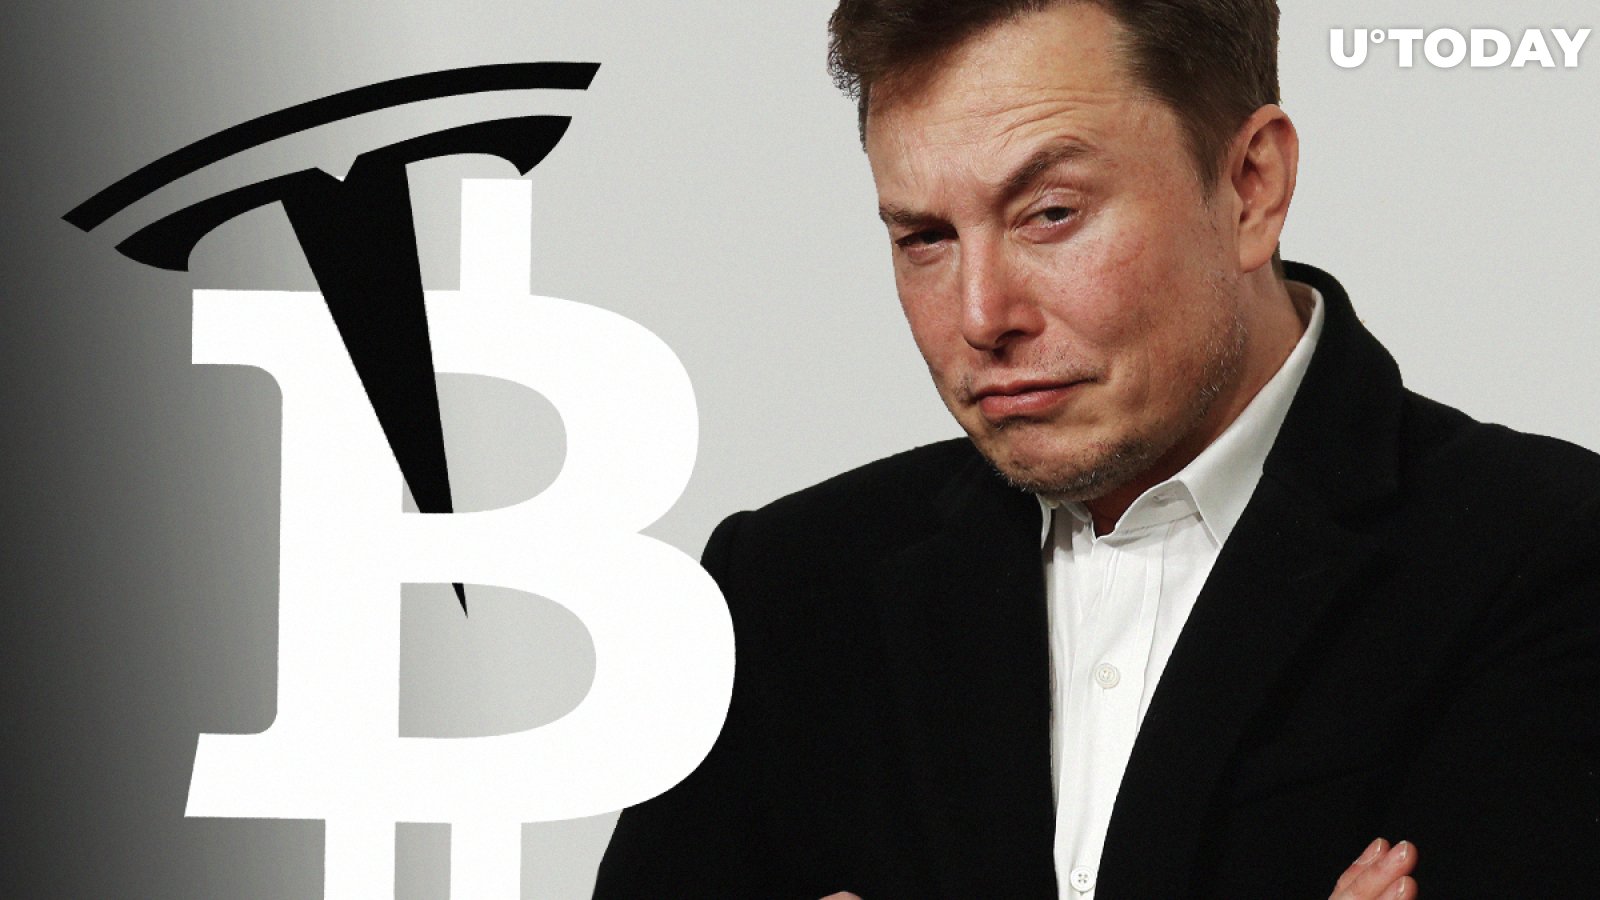 Bitcoin (BTC) Compared to Tesla (TSLA) by Prominent Investor. Elon Musk Won't Like It